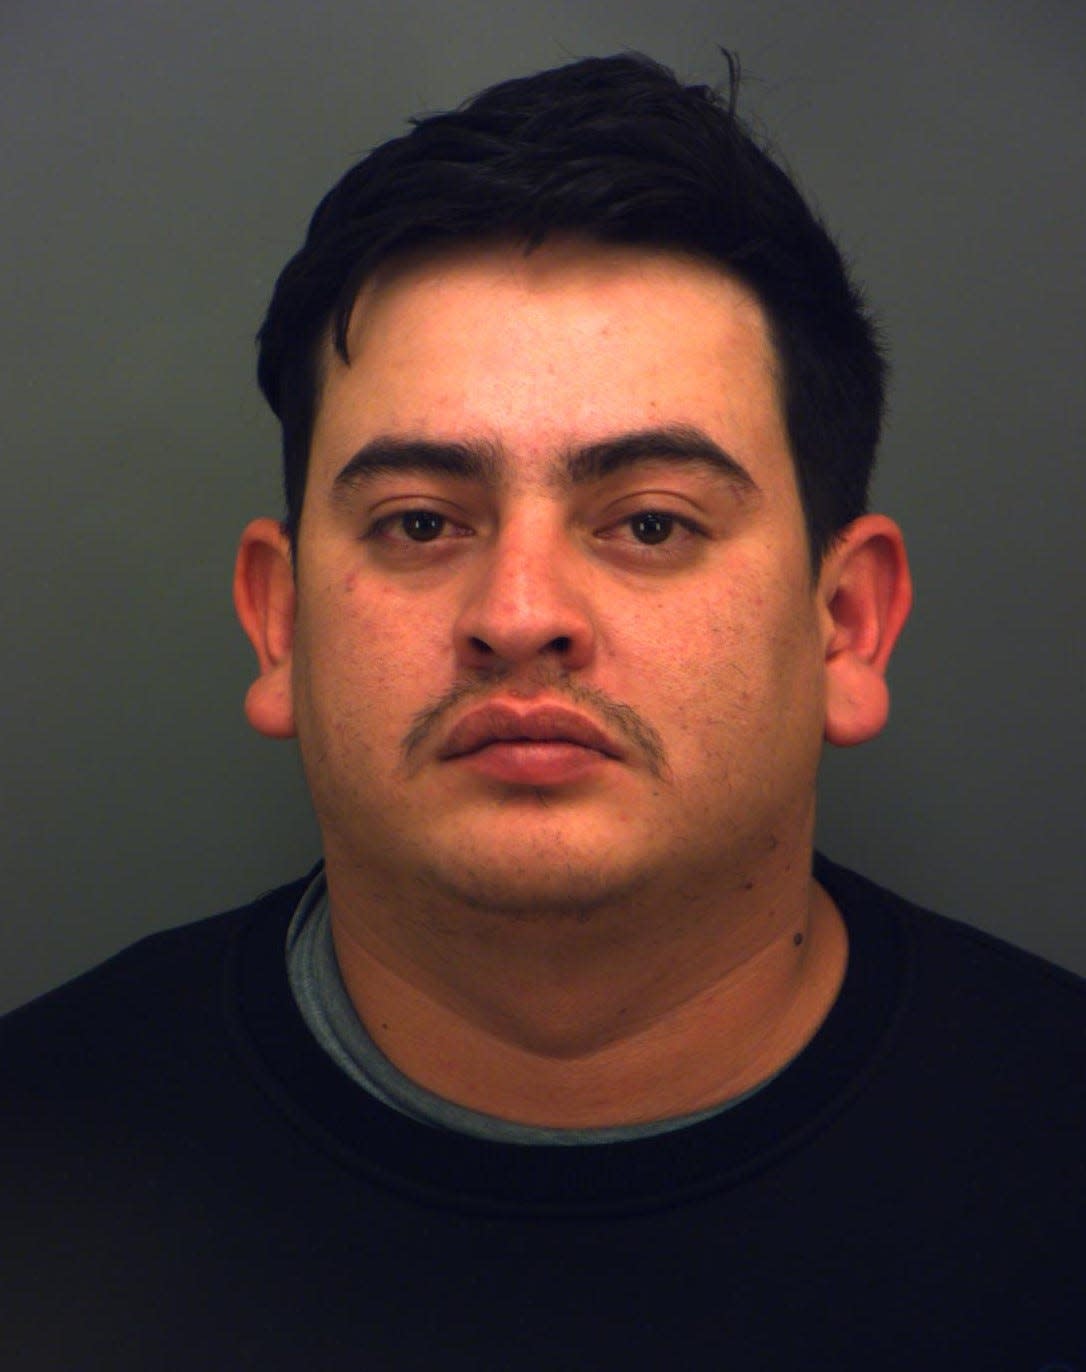 Gustavo Alexis Enriquez Acosta was arrested by the Texas Department of Public Safety in October for allegedly belonging to a drug cartel-linked human smuggling ring in El Paso.